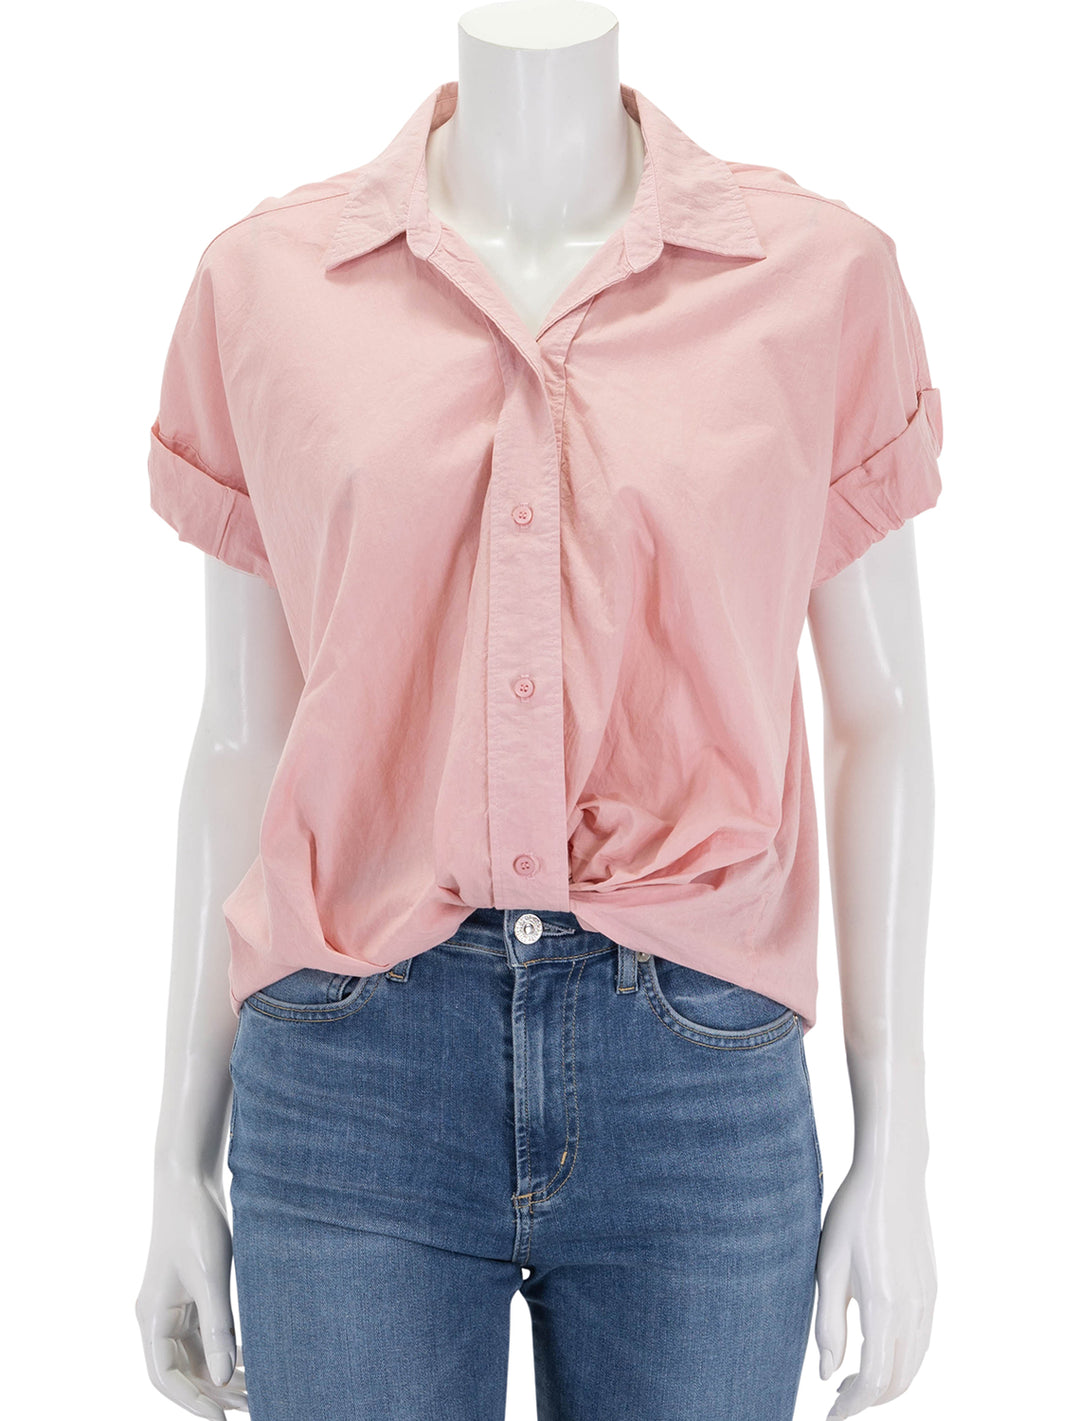 Front view of Stateside's voile s/s twist front shirt in lipstick pink.